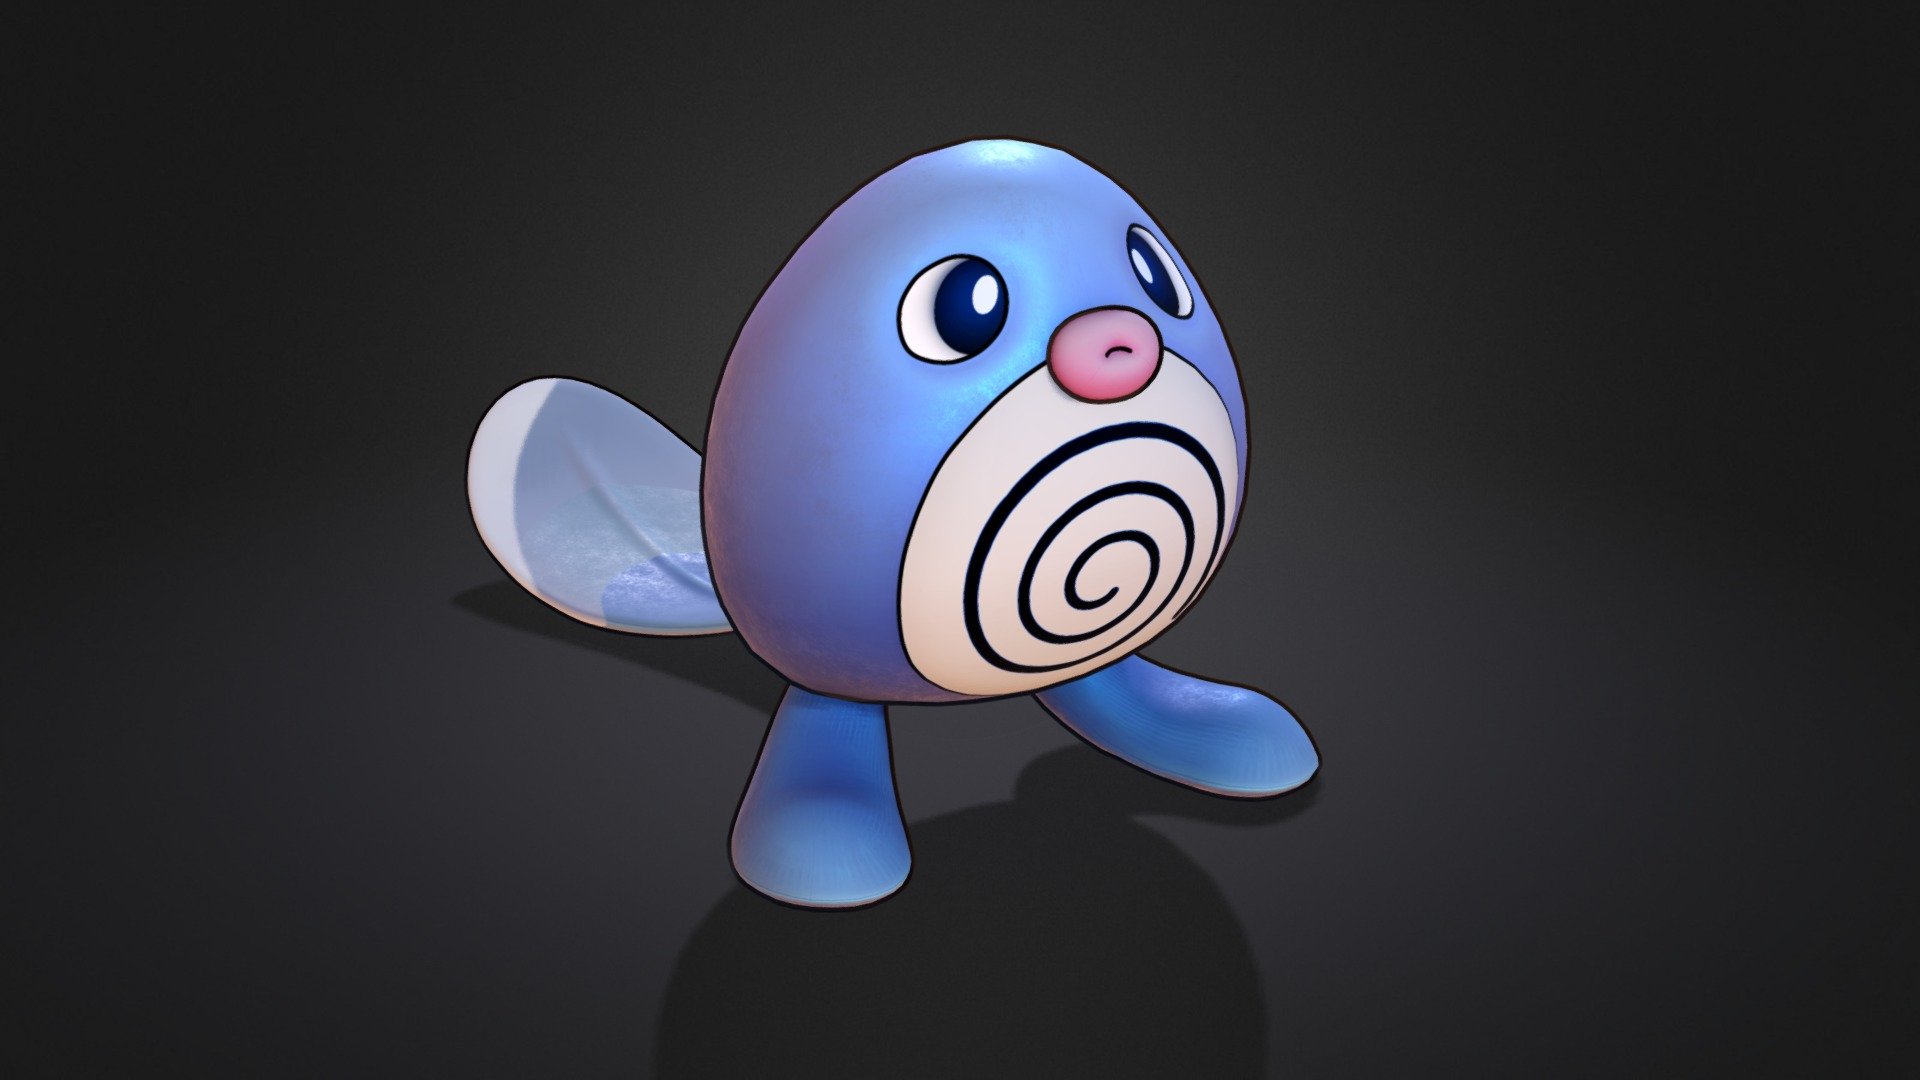 Not that popular, but still adorable.
Patreon - https://www.patreon.com/3dlogicus - Poliwag Pokemon - 3D model by 3dlogicus 3d model